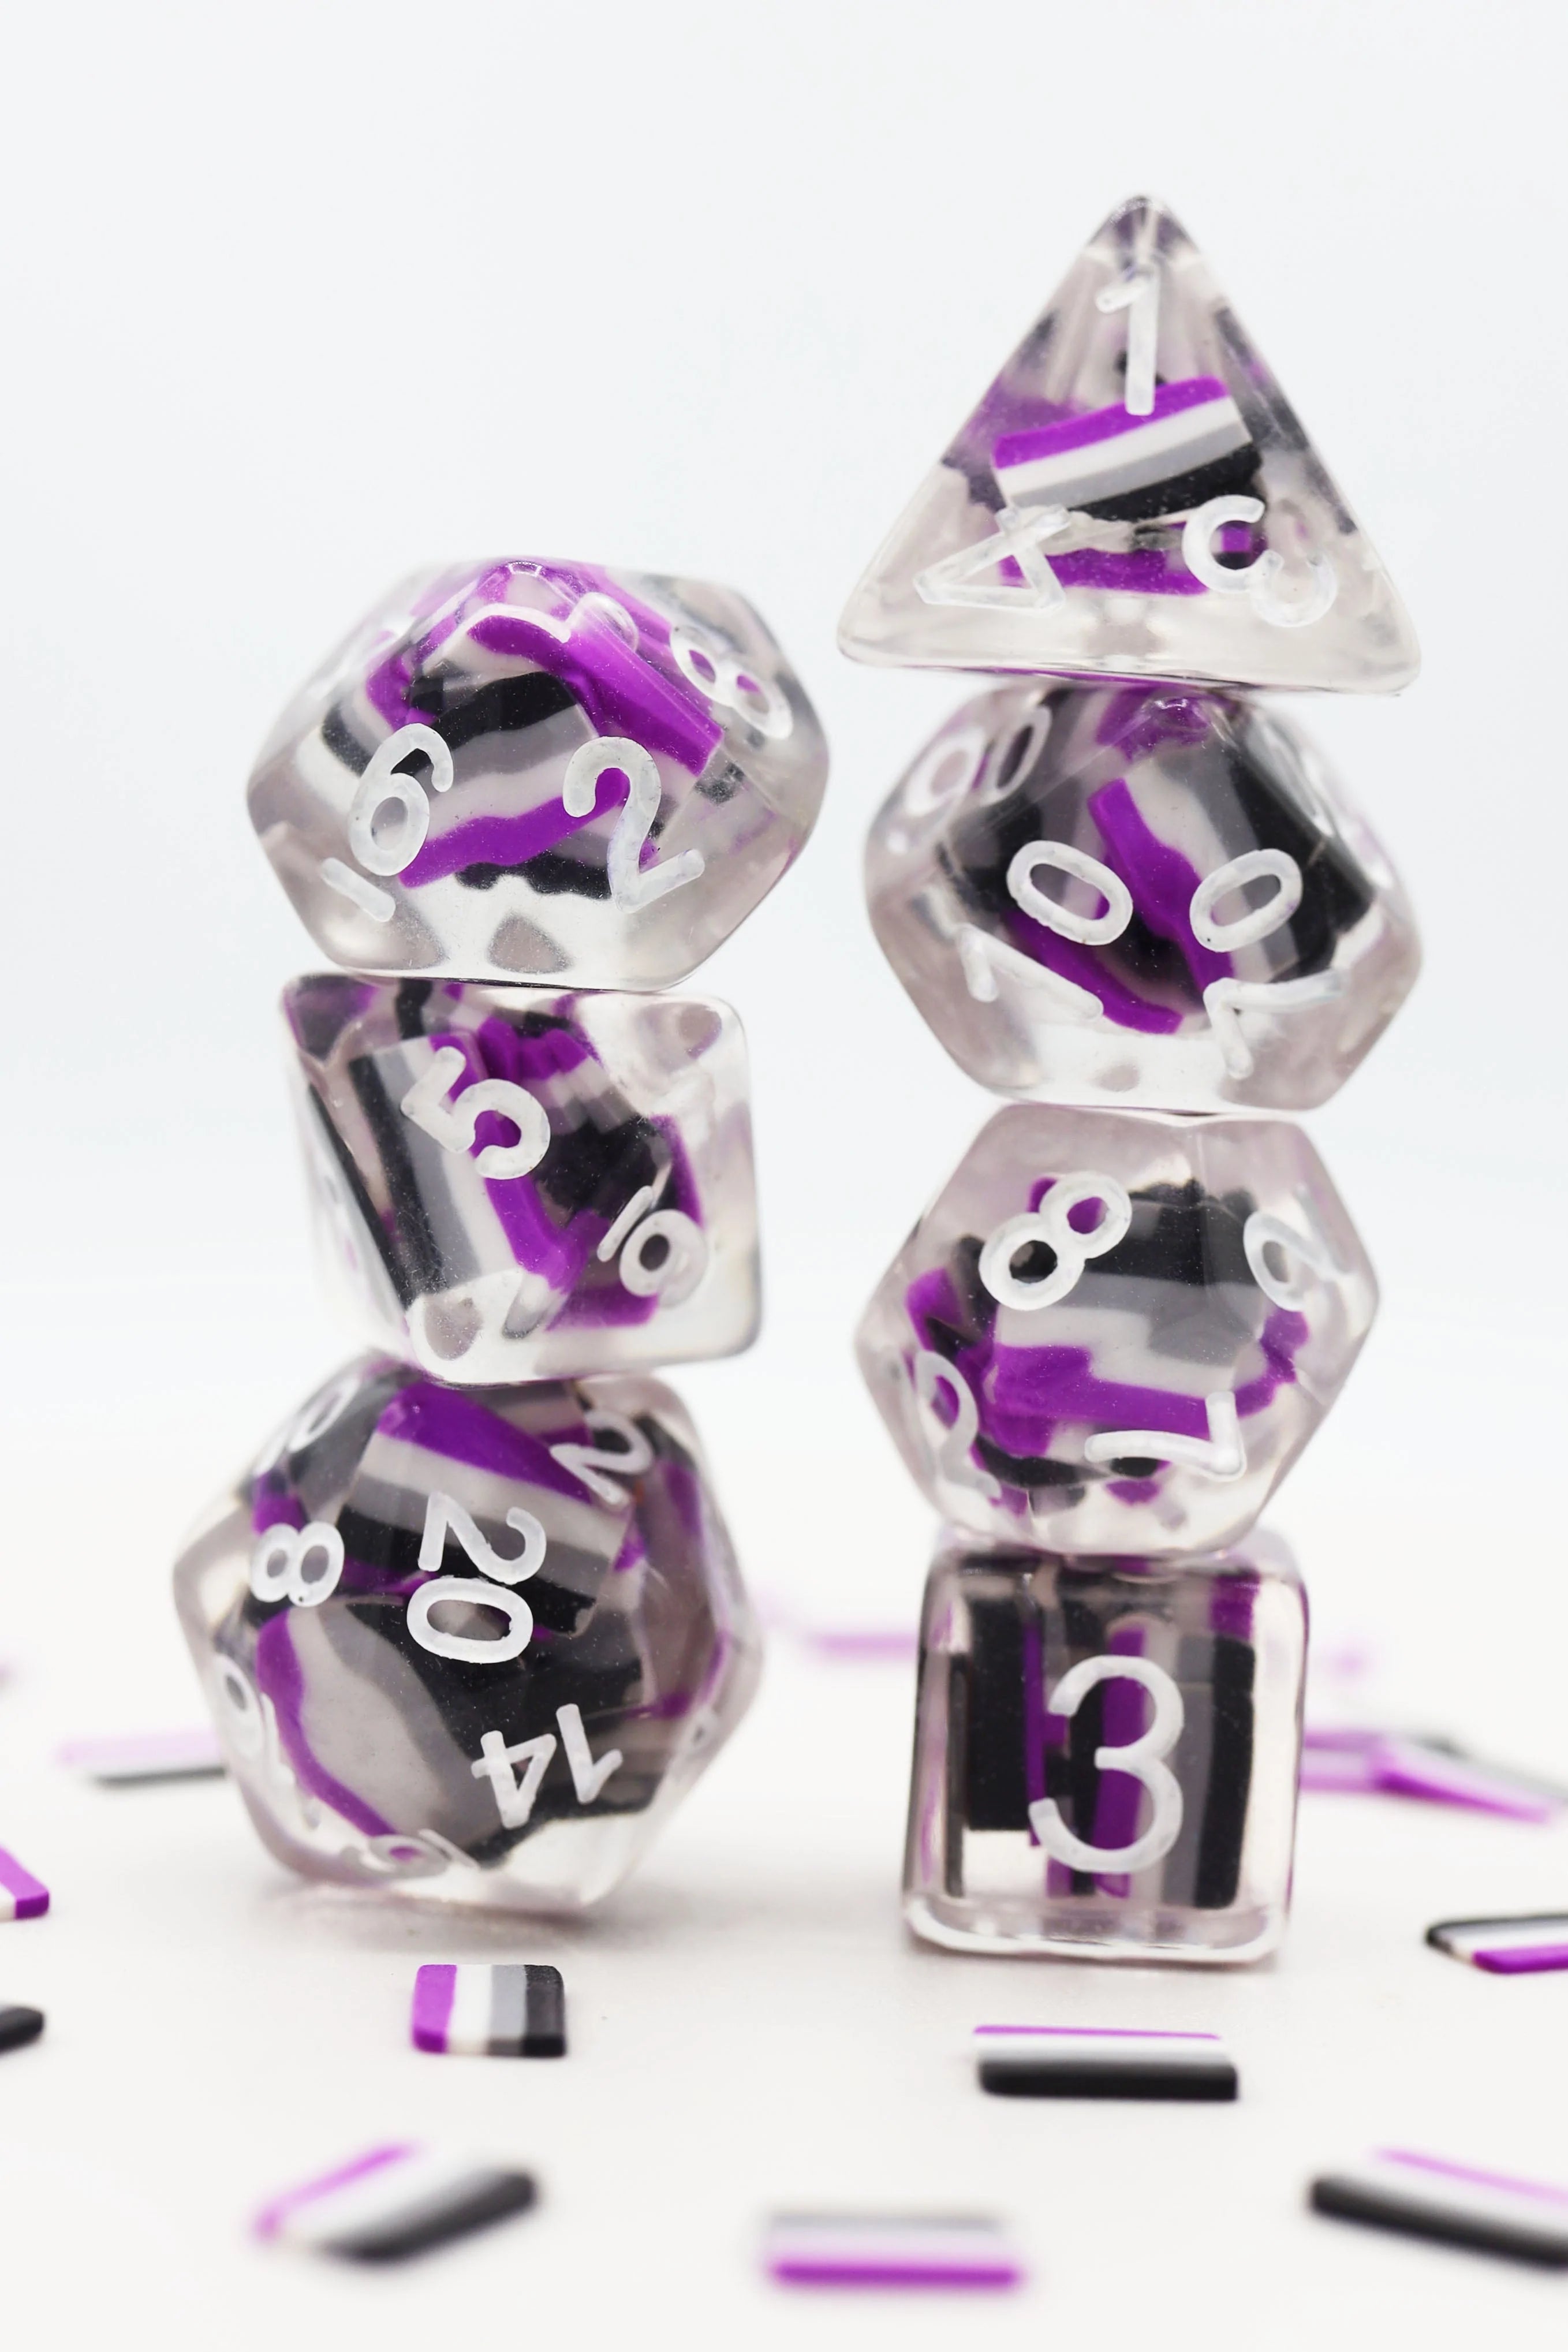 Pride Dice - Asexual Pins Foam Brain Games    | Red Claw Gaming